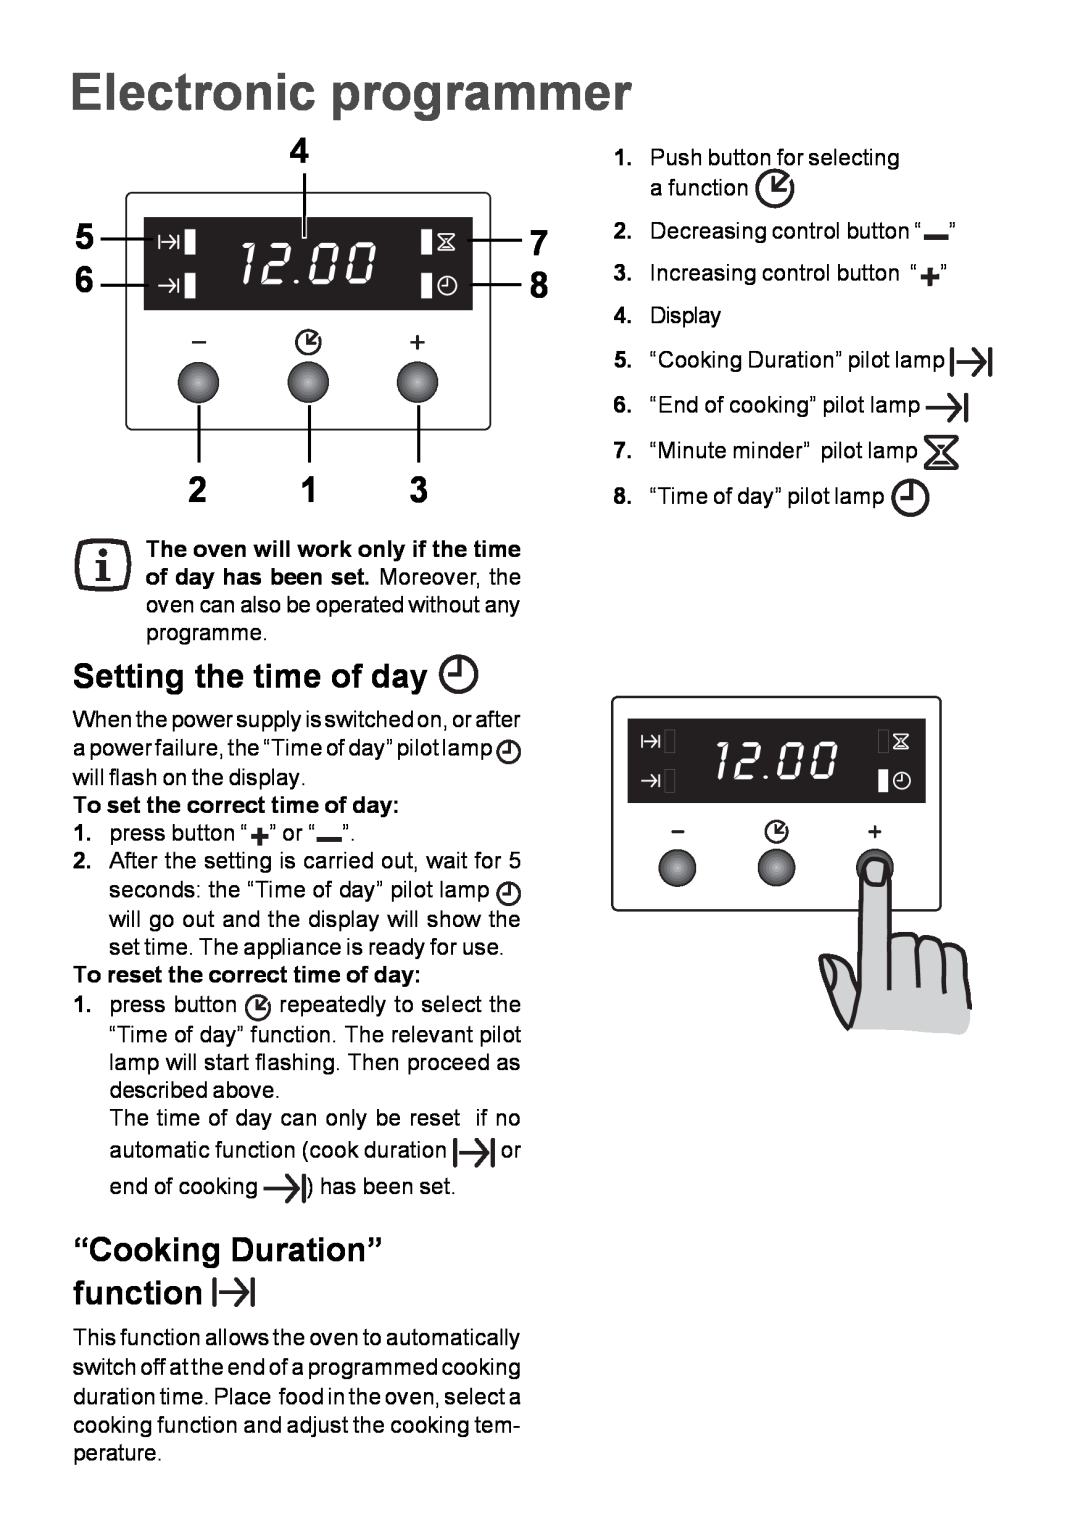 Moffat MSF 615 Electronic programmer, Setting the time of day, “Cooking Duration” function, To set the correct time of day 